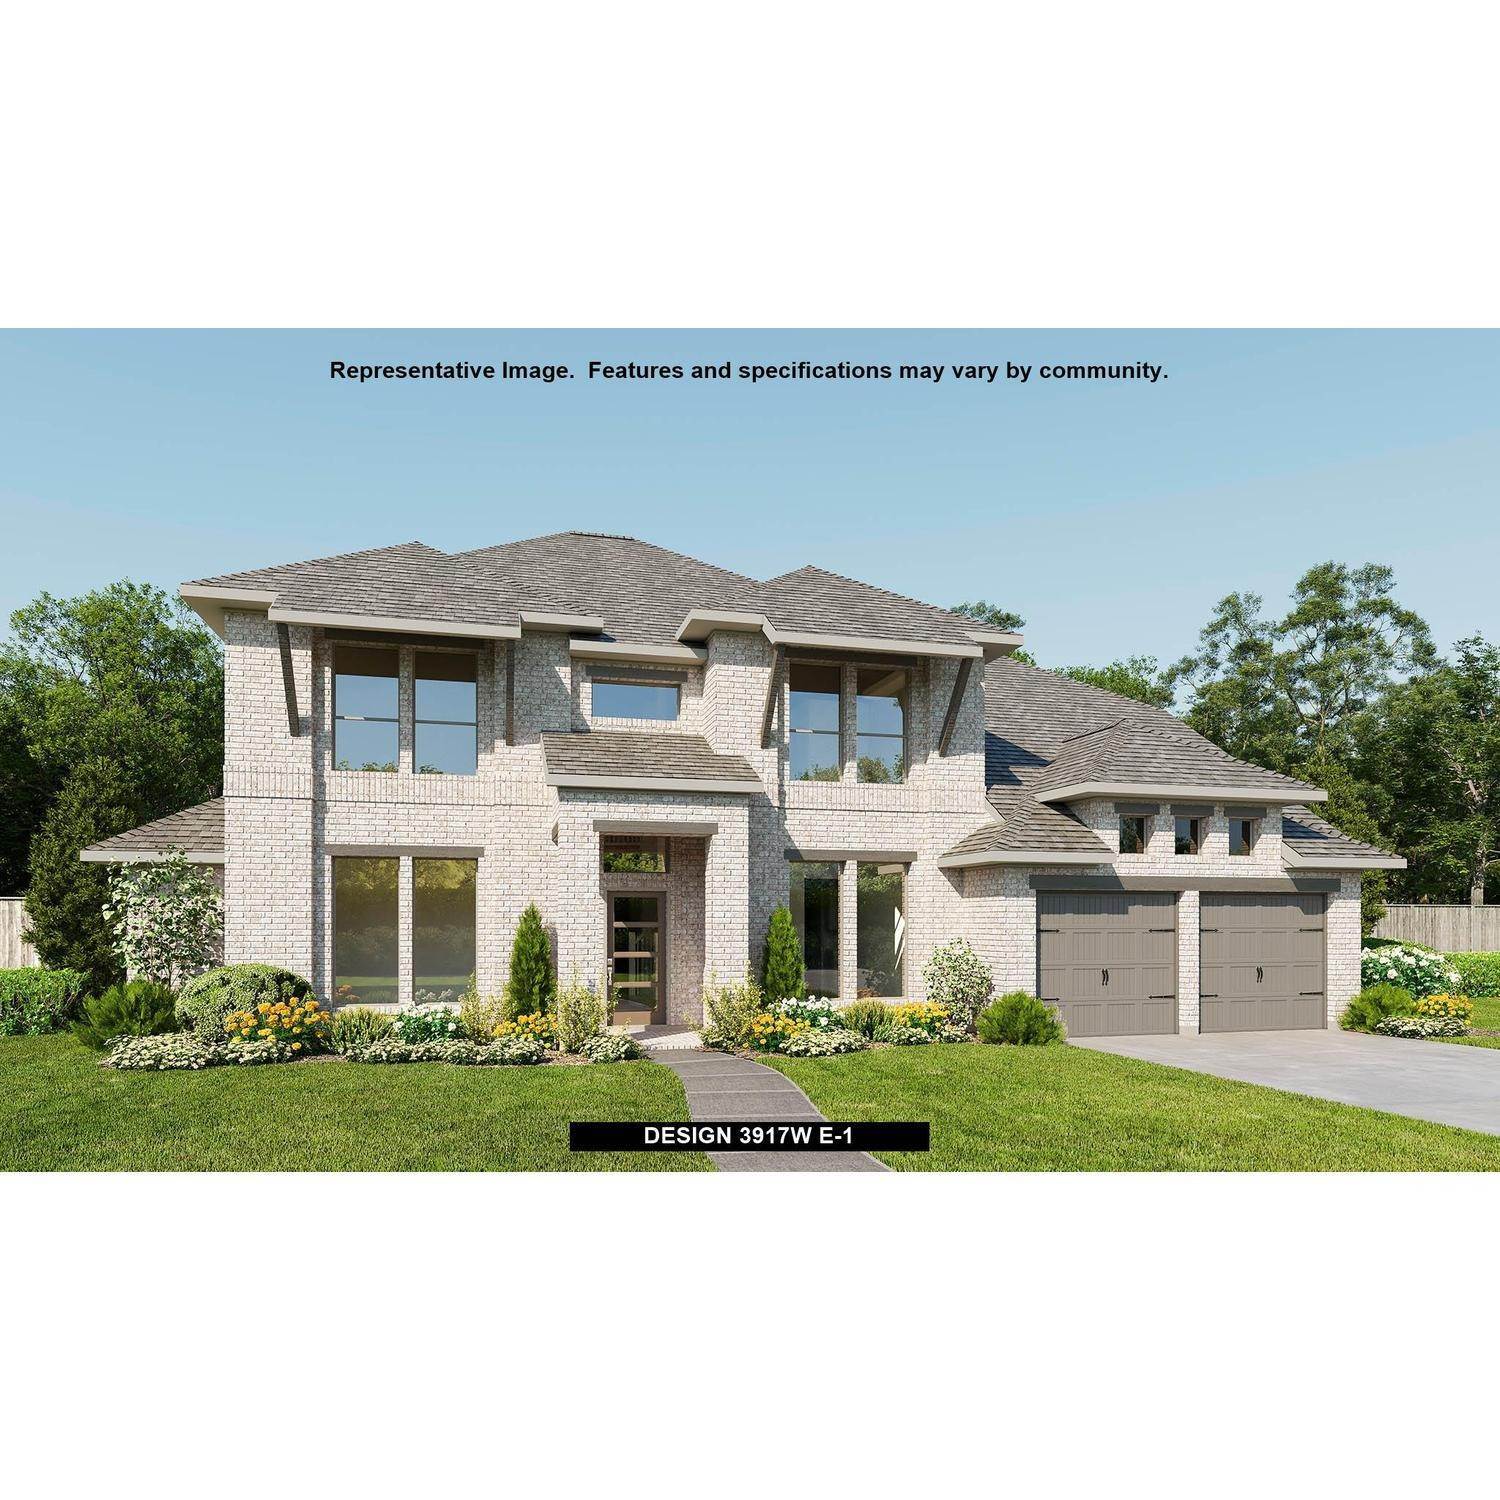 Single Family for Sale at Cane Island 80' 1914 Kessler Point Place, Katy, TX 77494